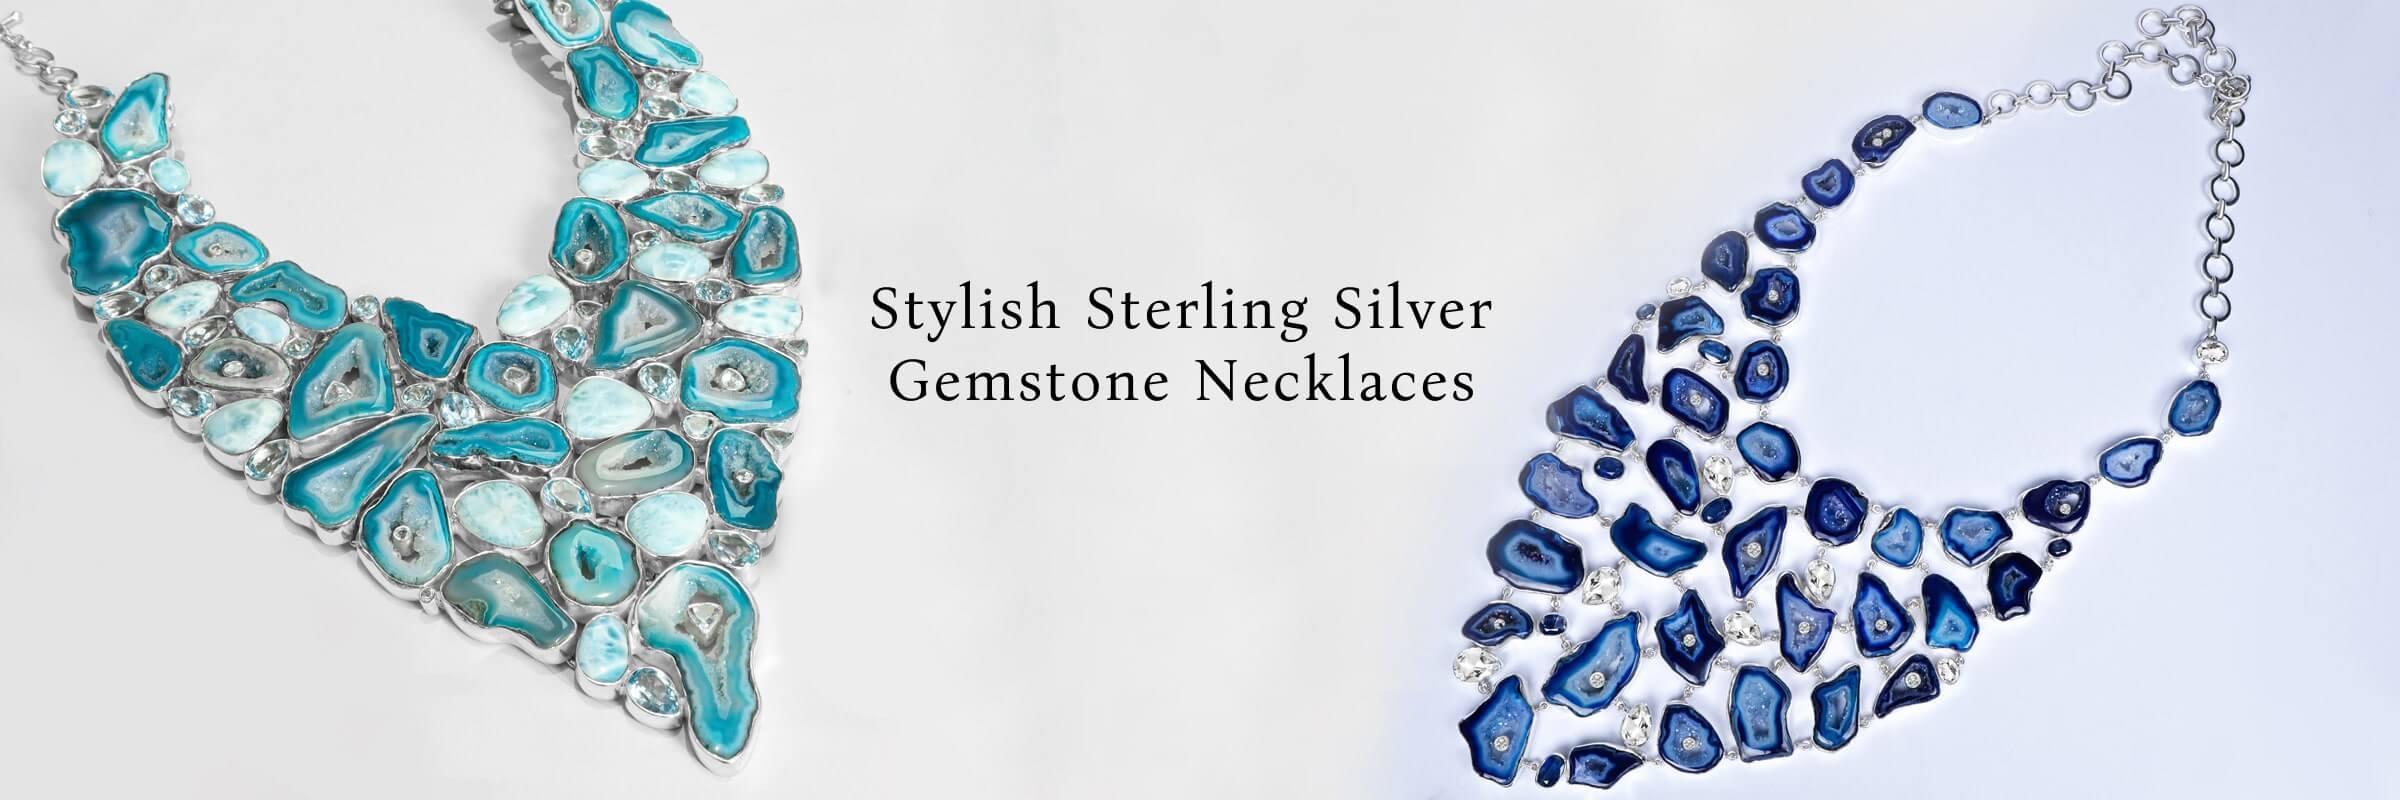 How To Style Your Sterling Silver Gemstone Necklace Perfectly 1